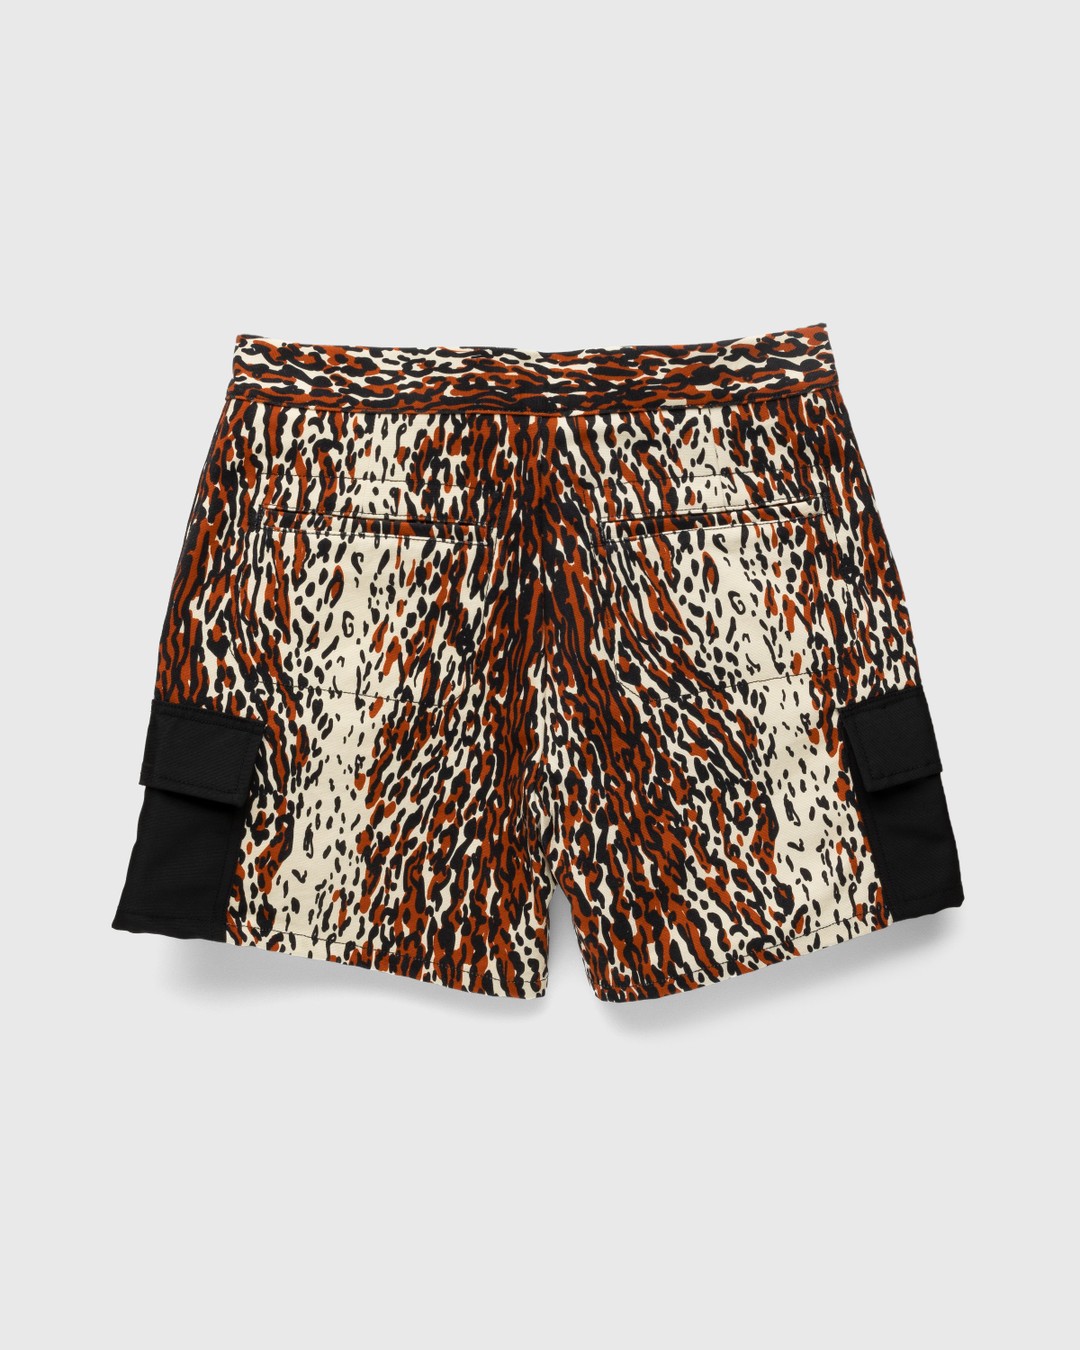 Phipps – Action Shorts Printed Canvas Leopard - Shorts - Brown - Image 2